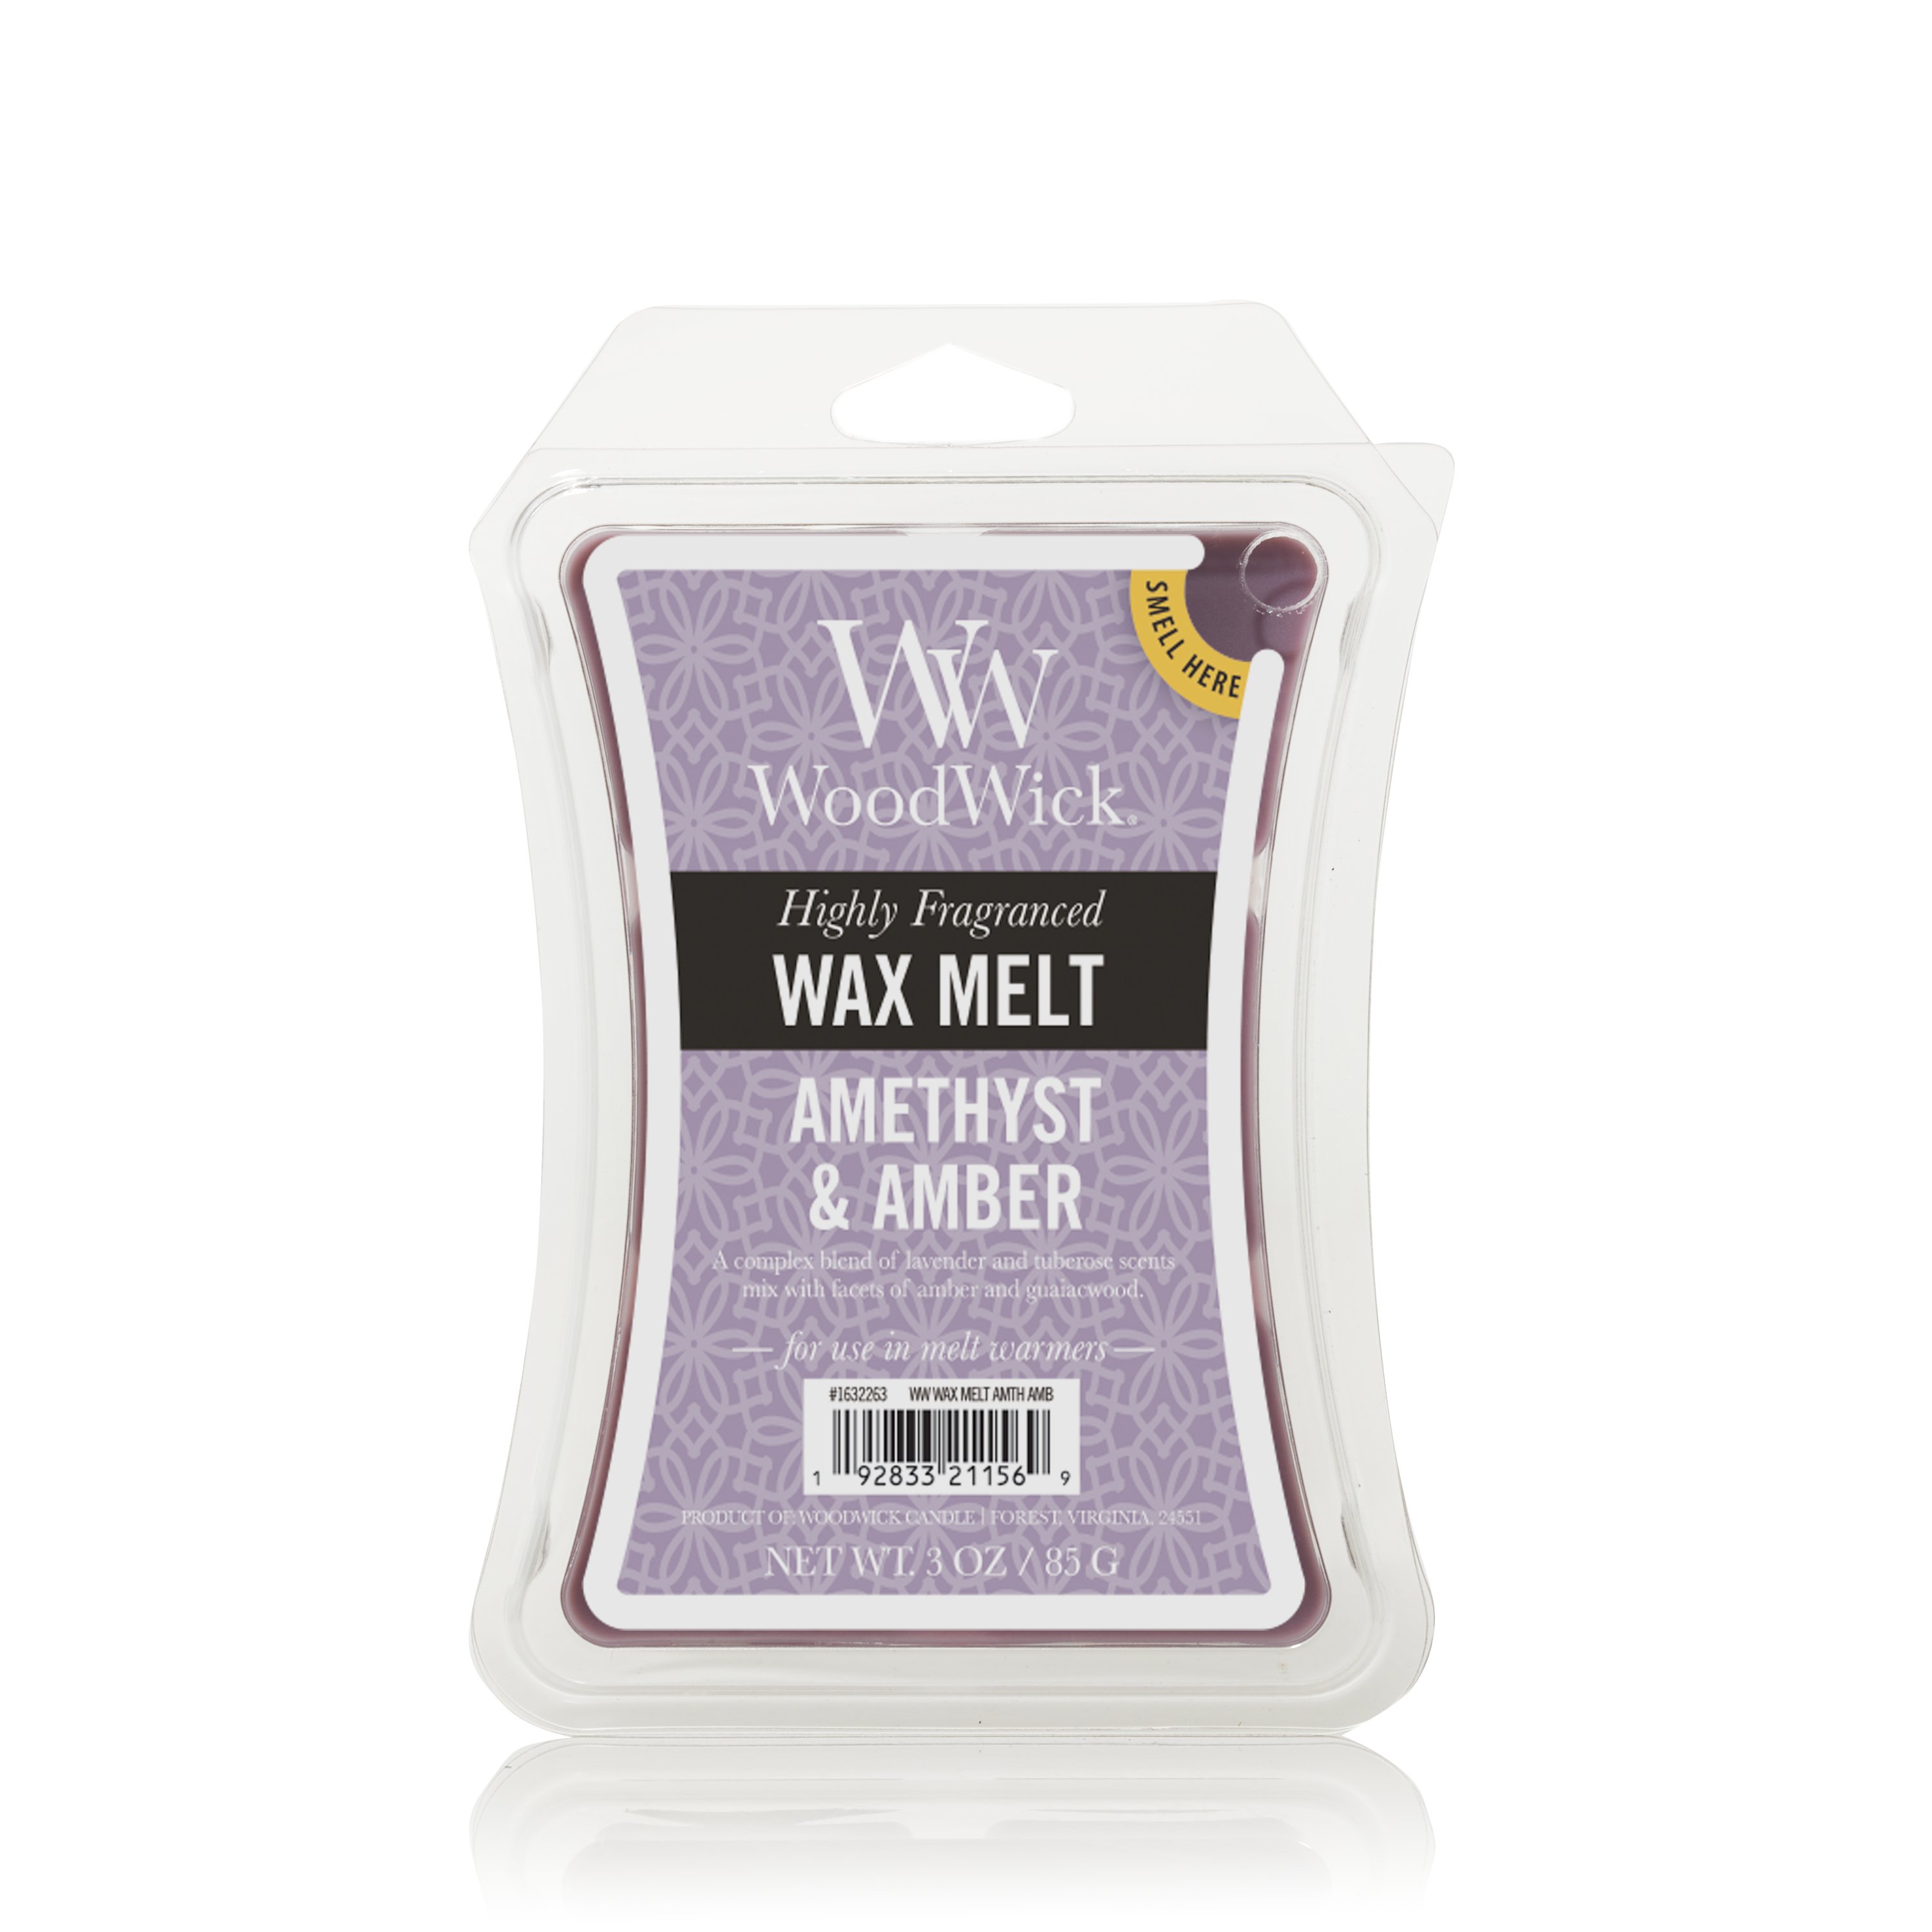 Forest City - Wax Melts - Cleveland Candle Company